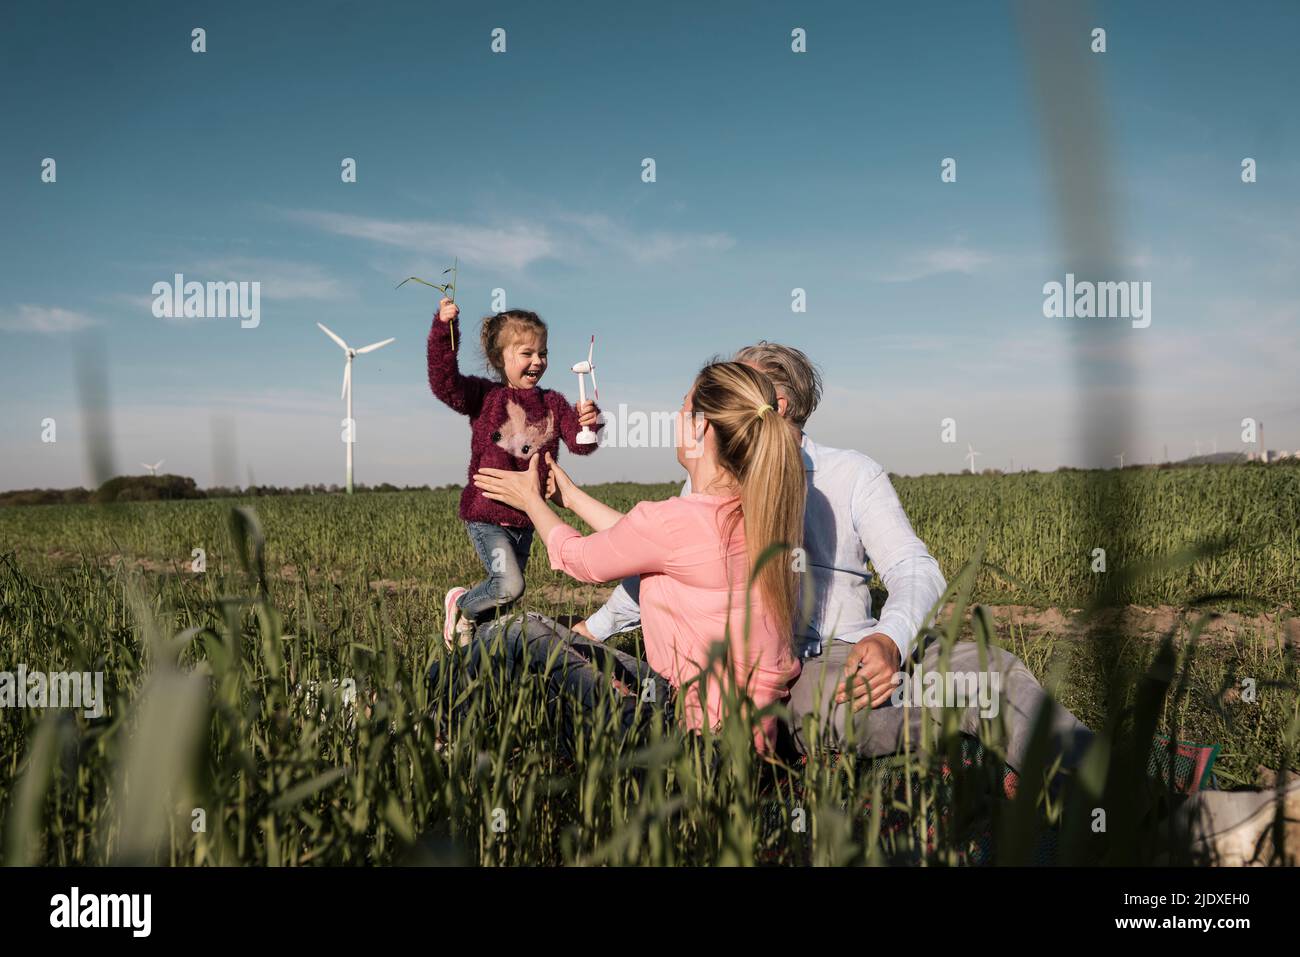 Playful girl holding wind turbine model running towards parents in field Stock Photo